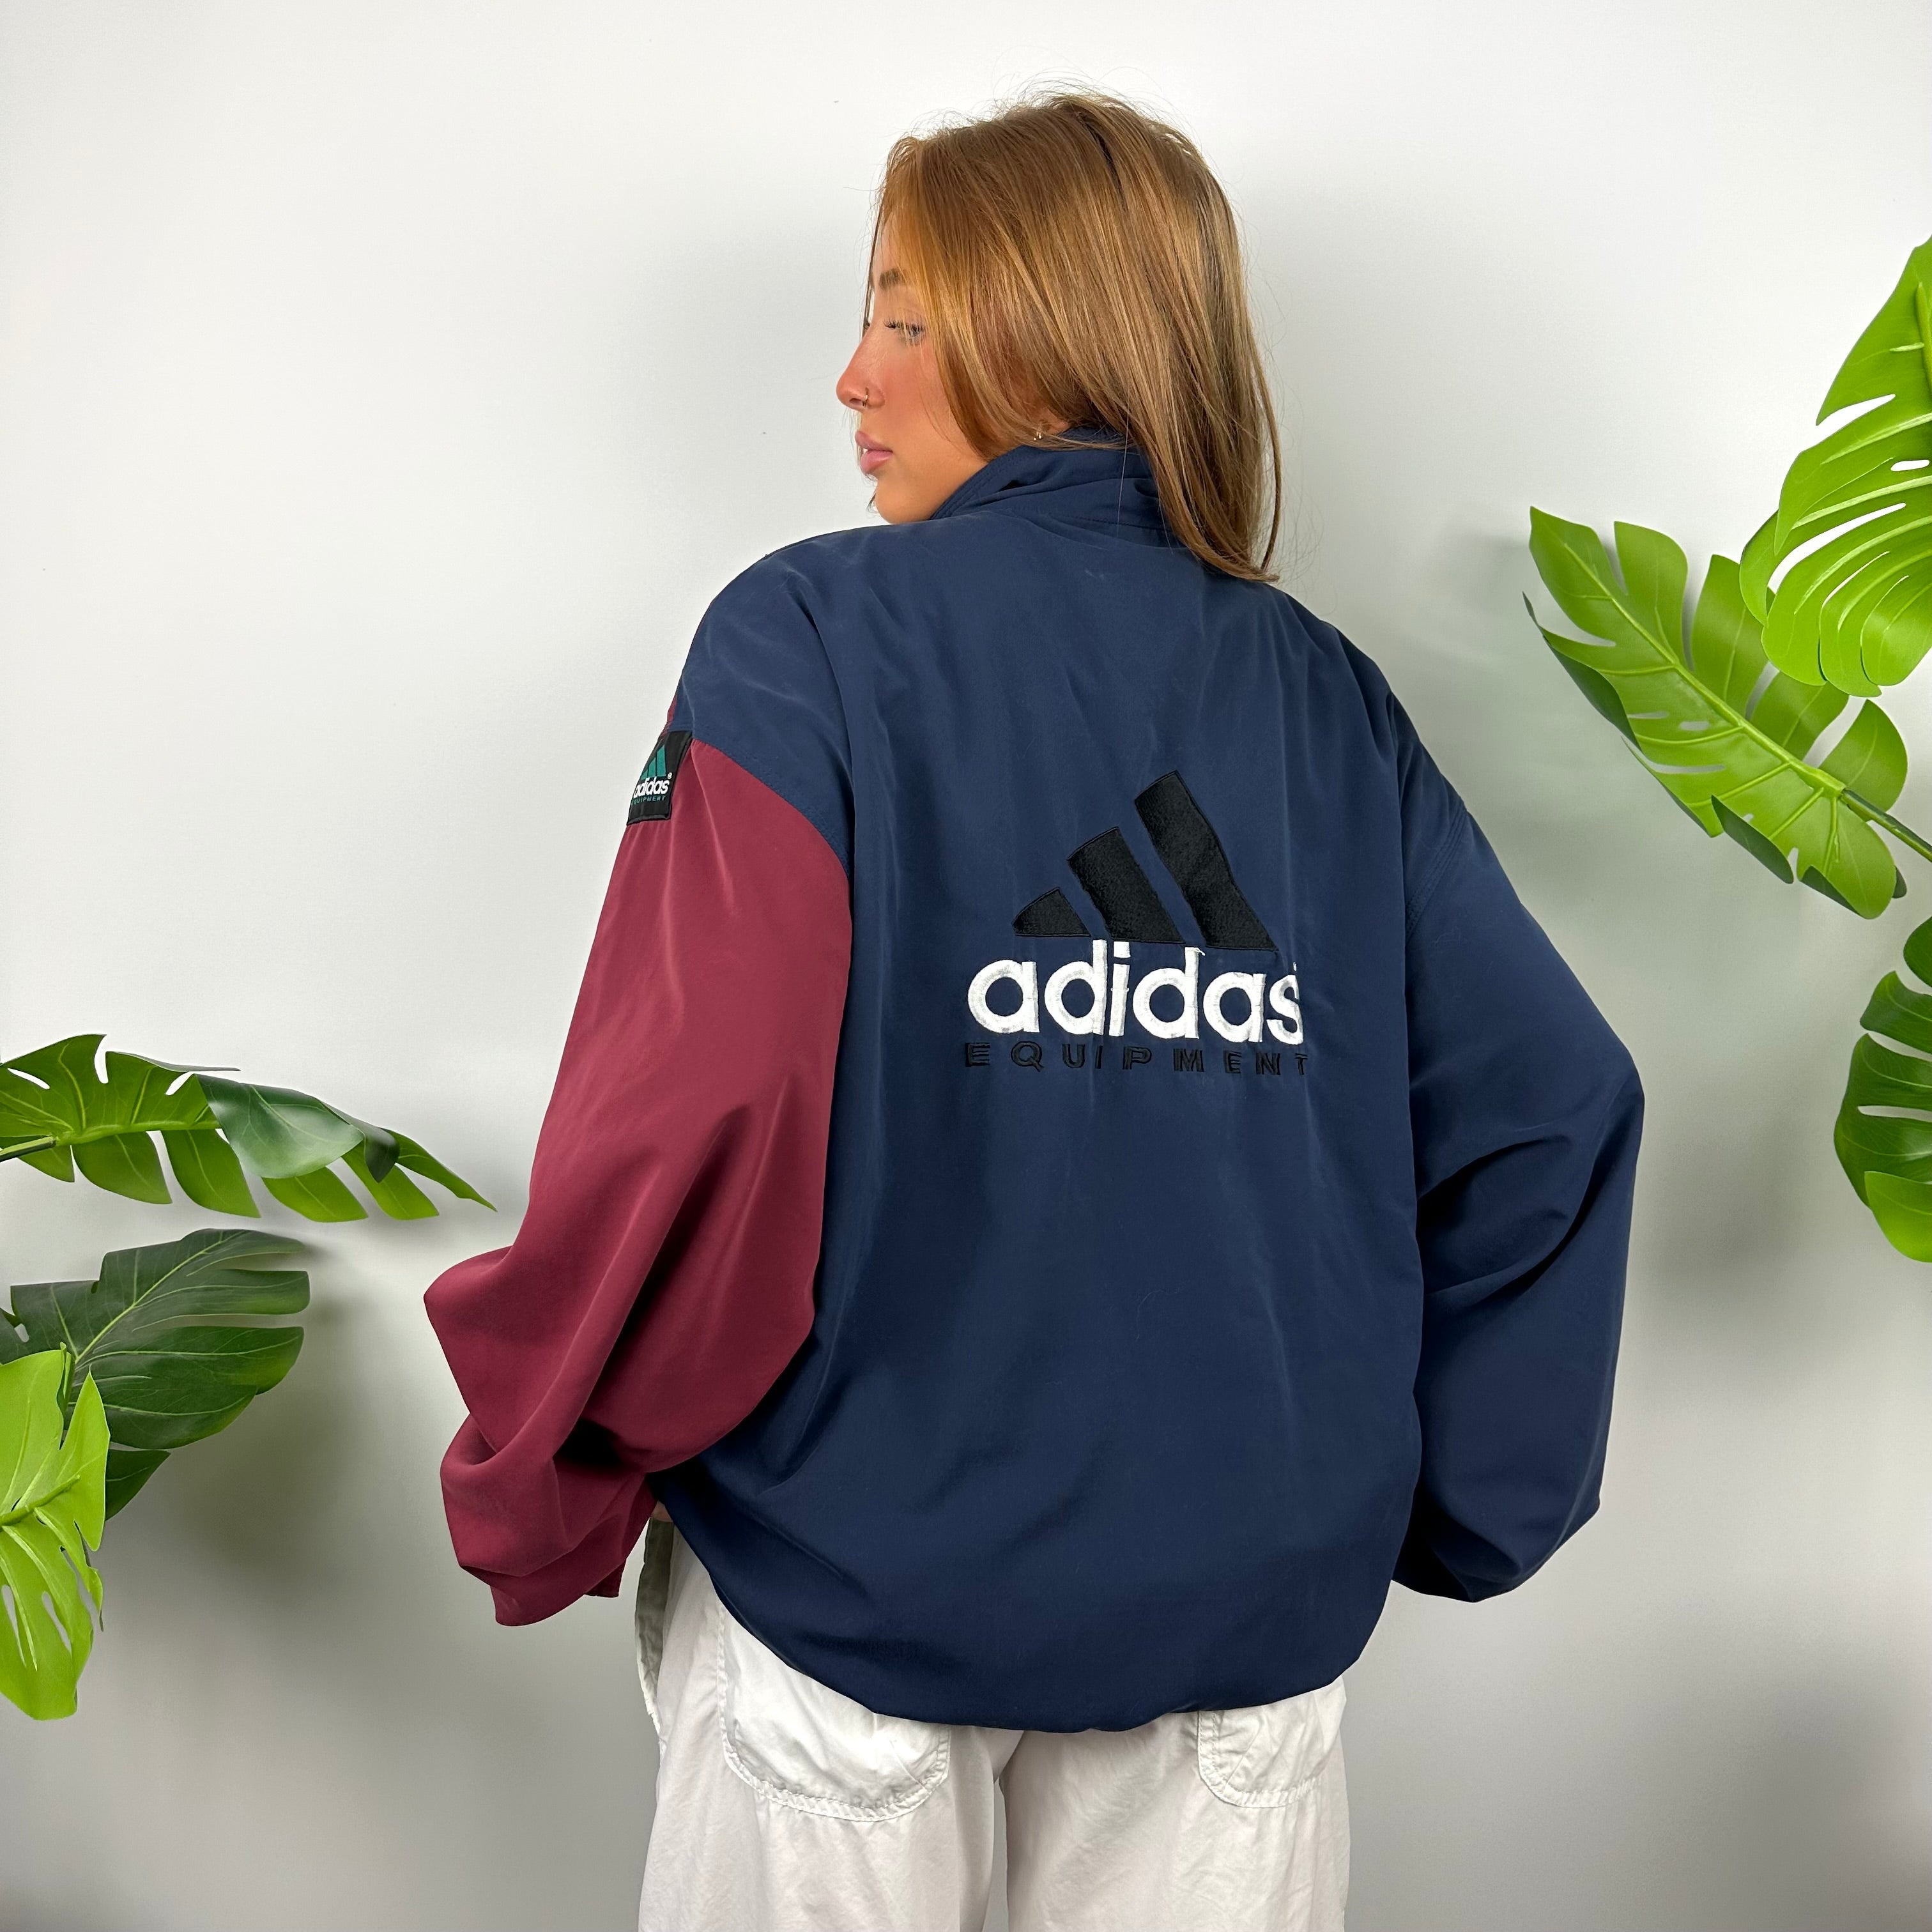 Adidas Equipment RARE Navy & Maroon Embroidered Spell Out Padded Jacket (XL)